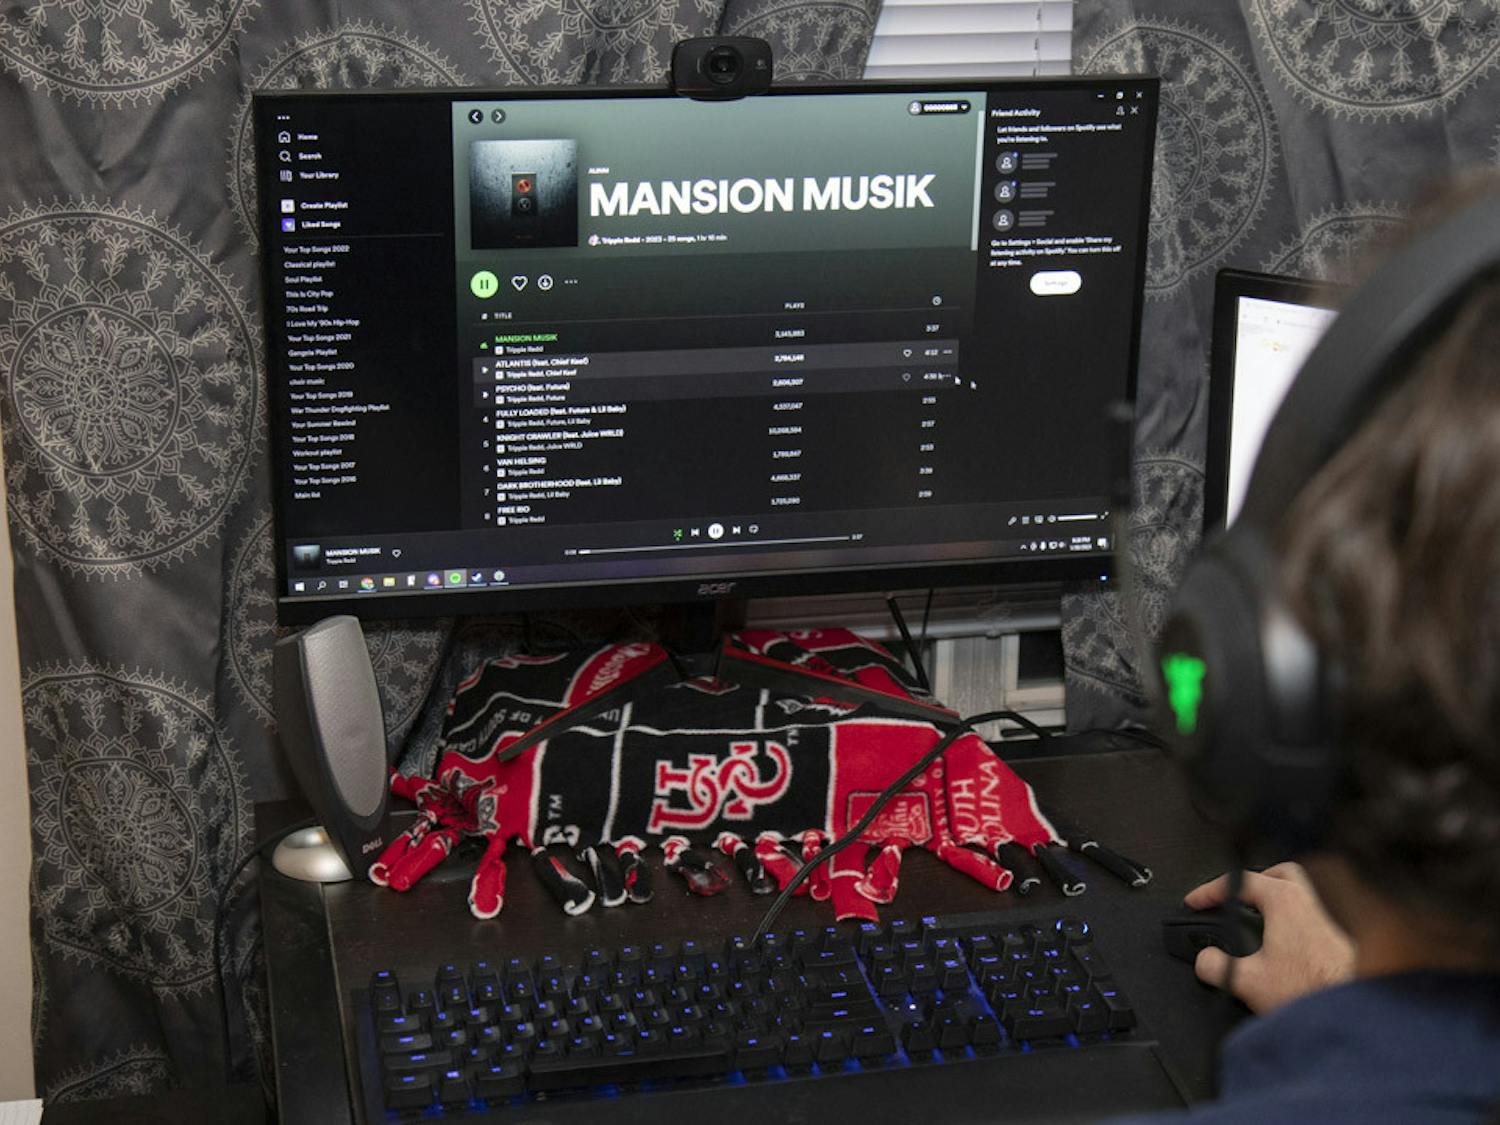 Fourth-year finance student Beck Stephenson listens to Trippie Redd's new album "Mansion Musik" on Jan 30, 2022. The new, 25-song album features lyrics from the late Juice WRLD and appearances from Lil Baby, Travis Scott, Future and other popular names in rap.